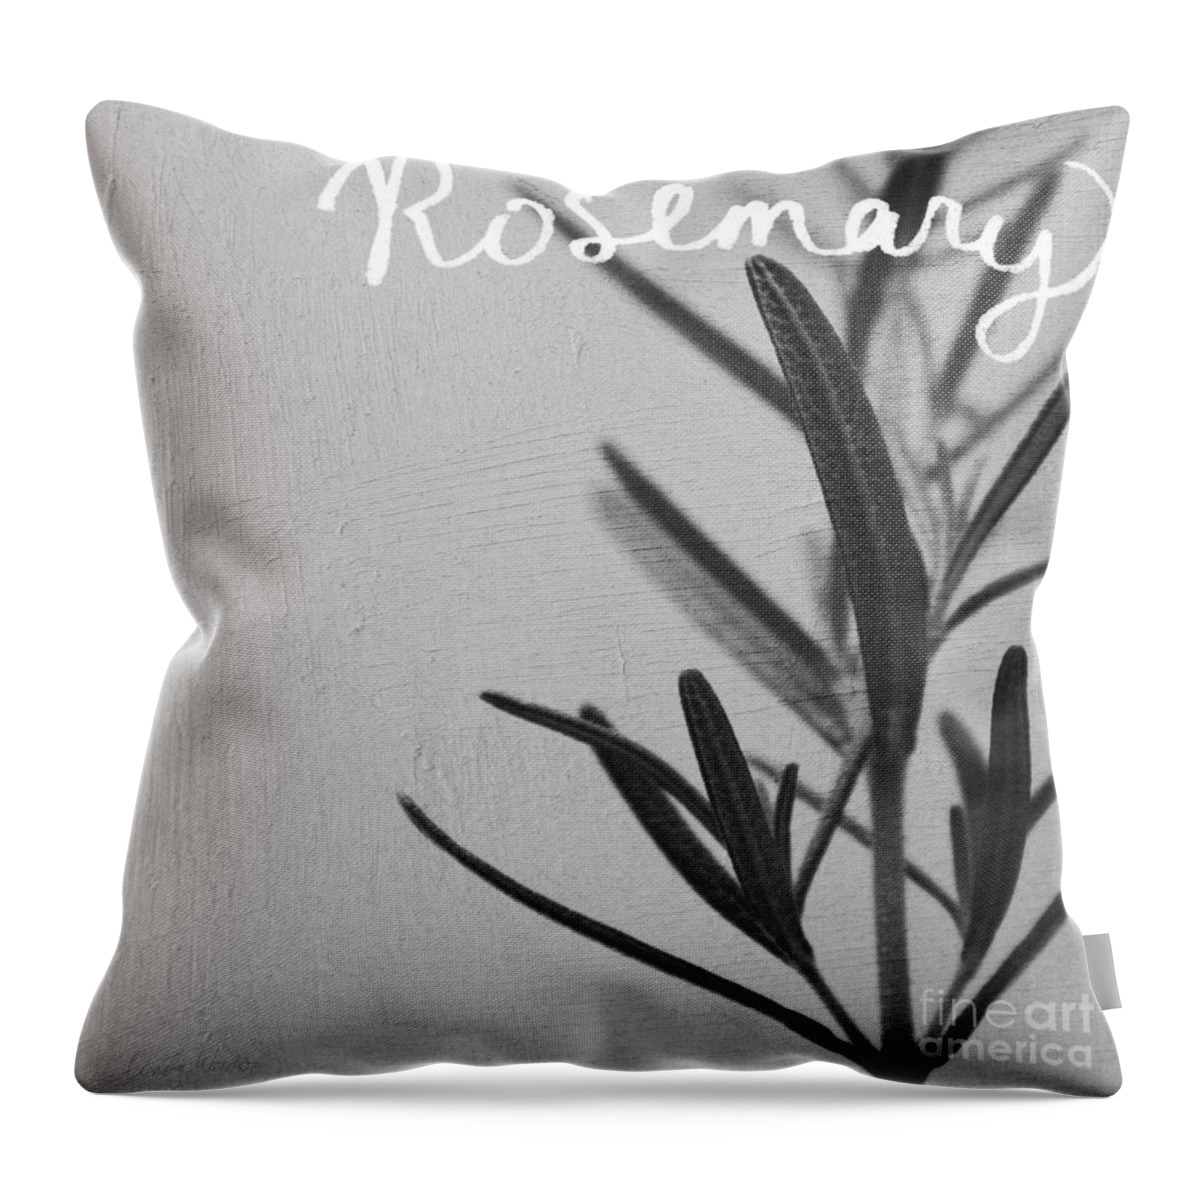 Rosemary Throw Pillow featuring the mixed media Rosemary by Linda Woods